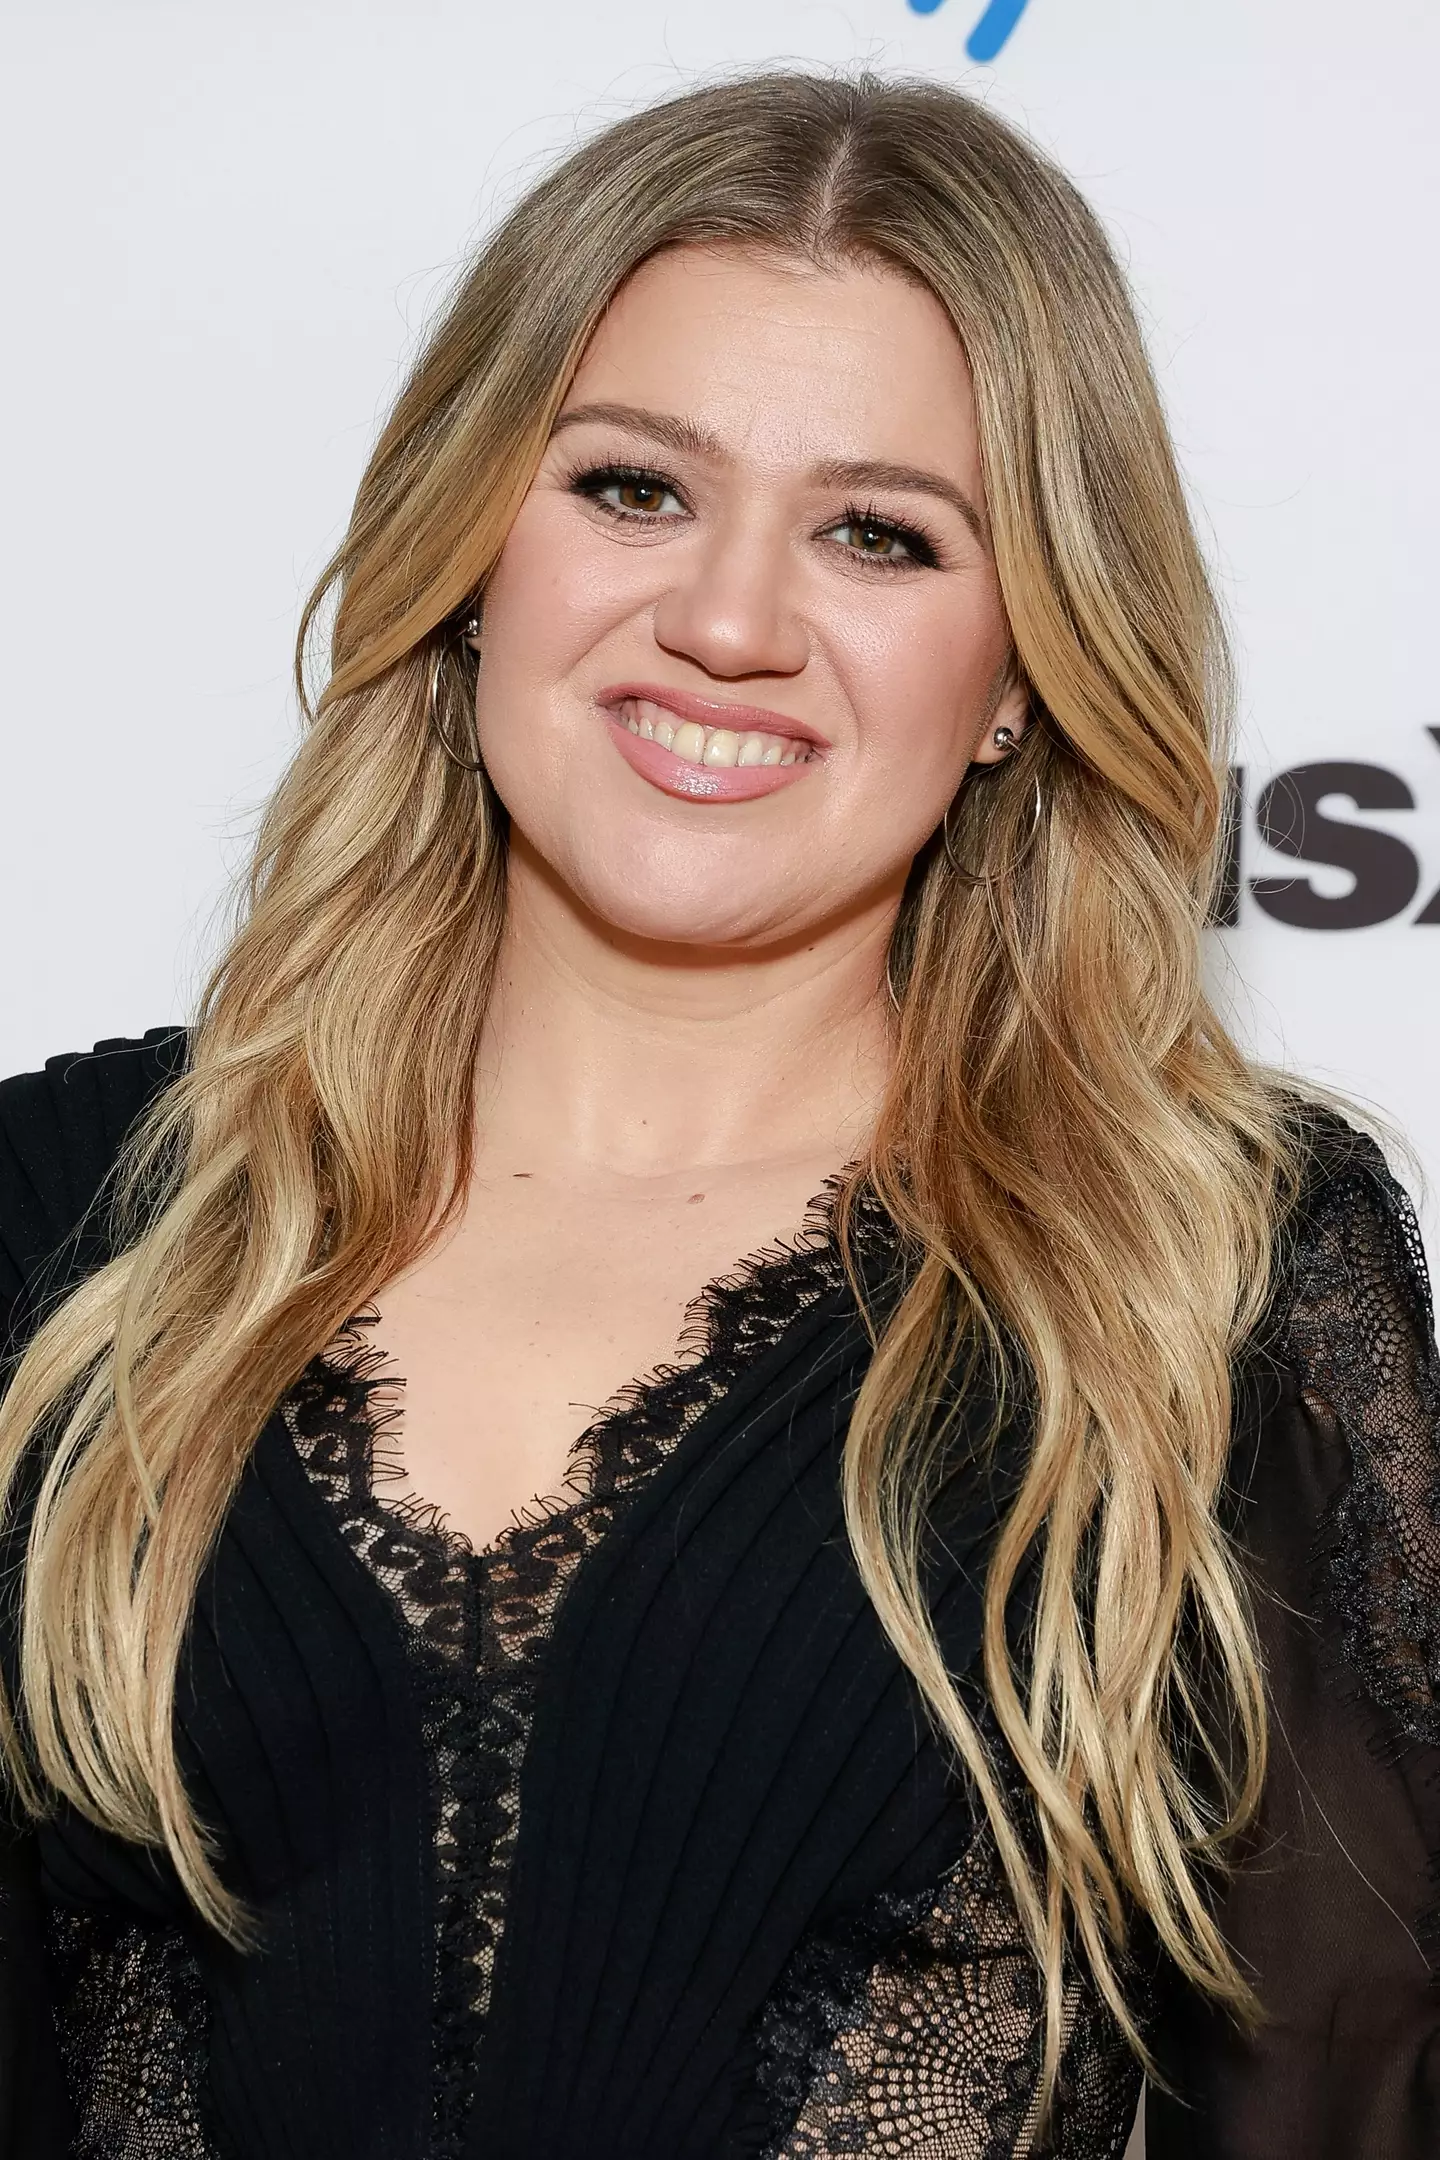 Kelly Clarkson says she's stopped feeling 'incredibly sad deep inside'.